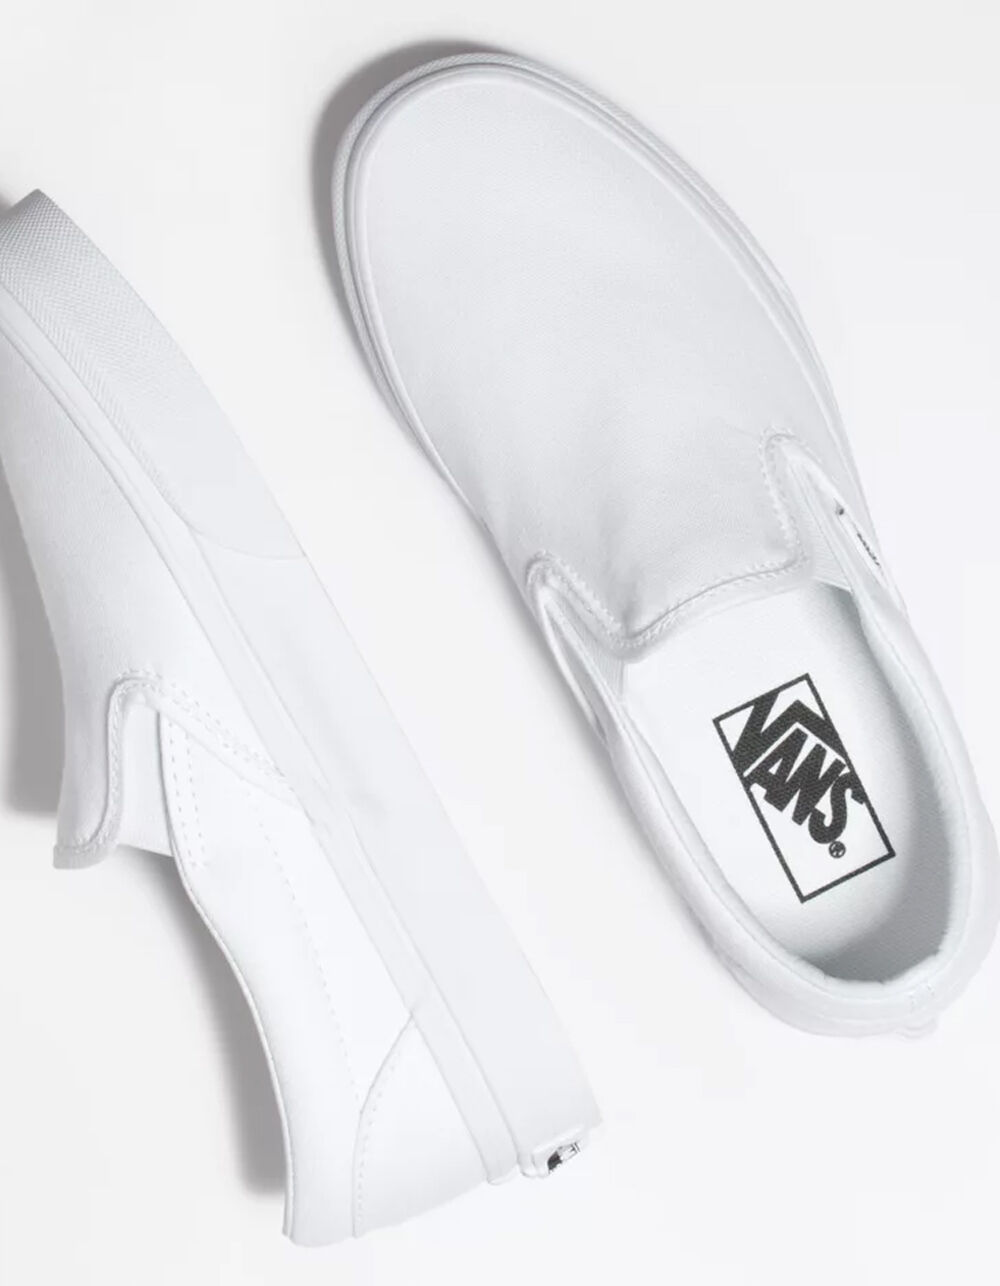 VANS Classic Slip-On True White Shoes image number 3